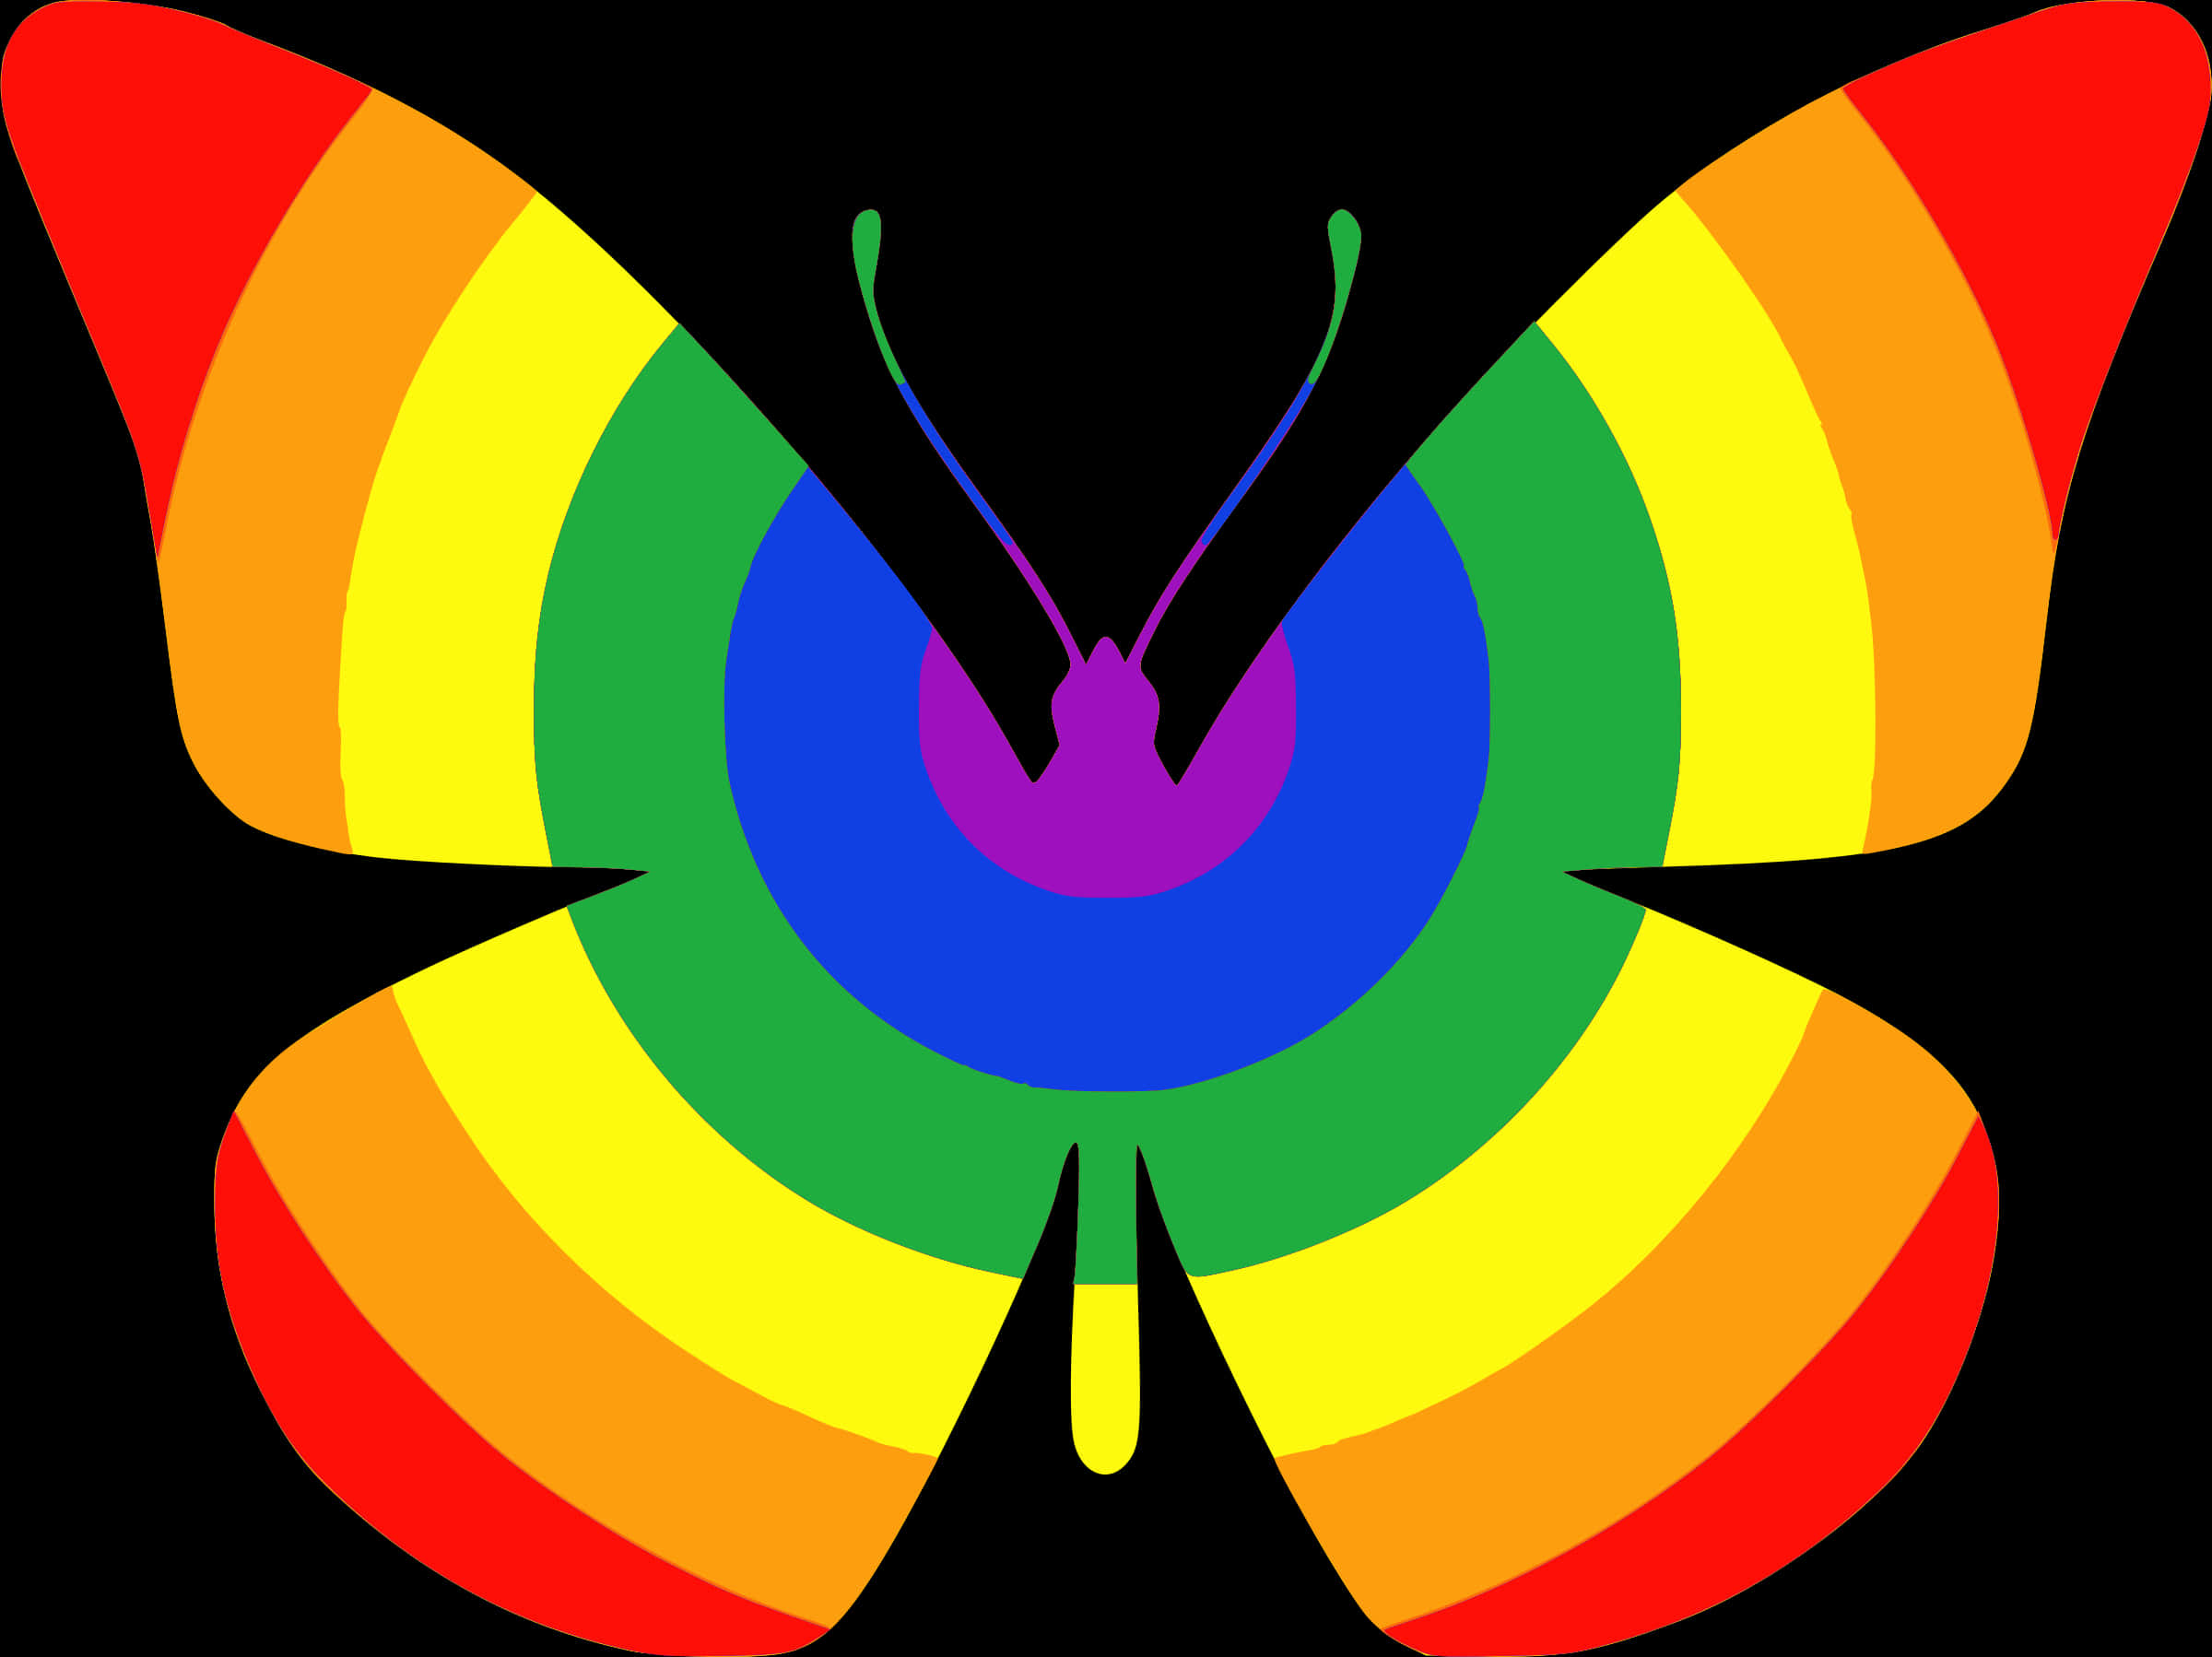 Colorful Abstract Butterfly Art PNG